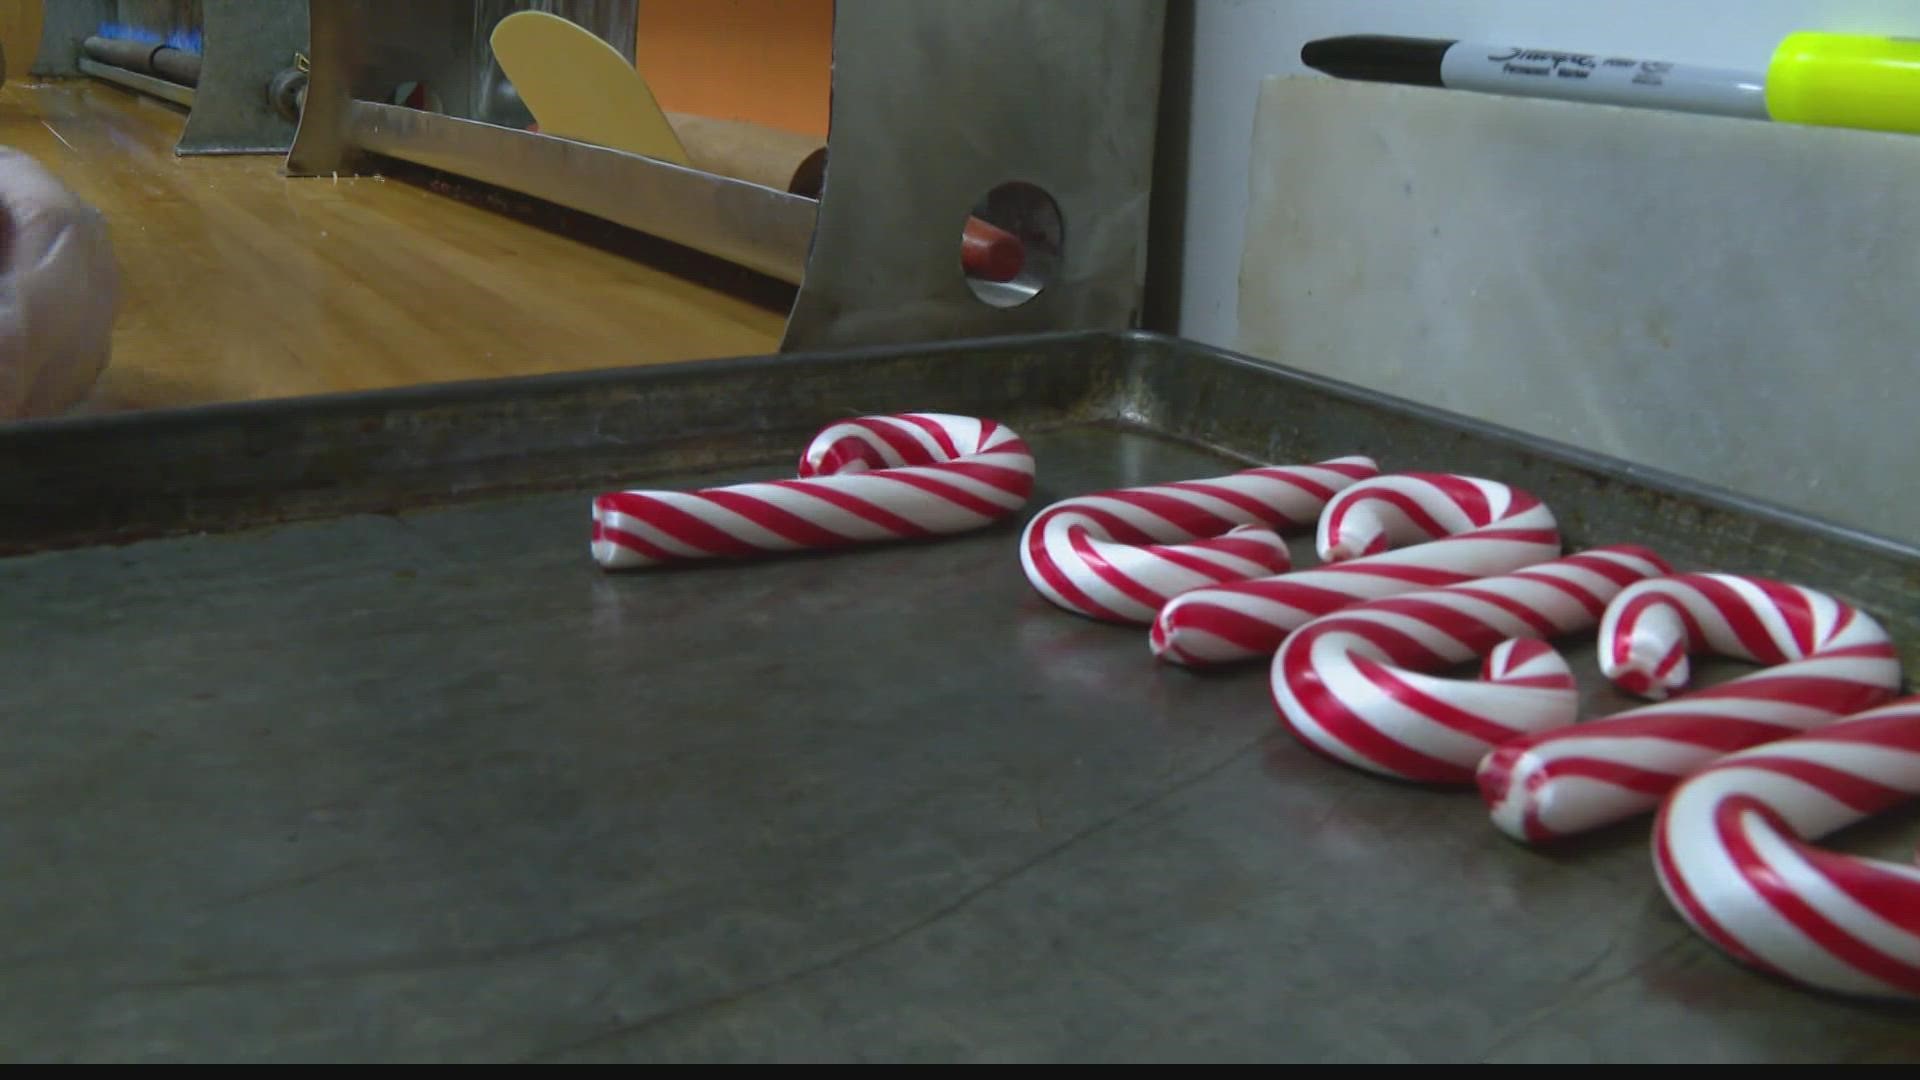 The store said they handmake 35,000-40,000 candy canes per year.